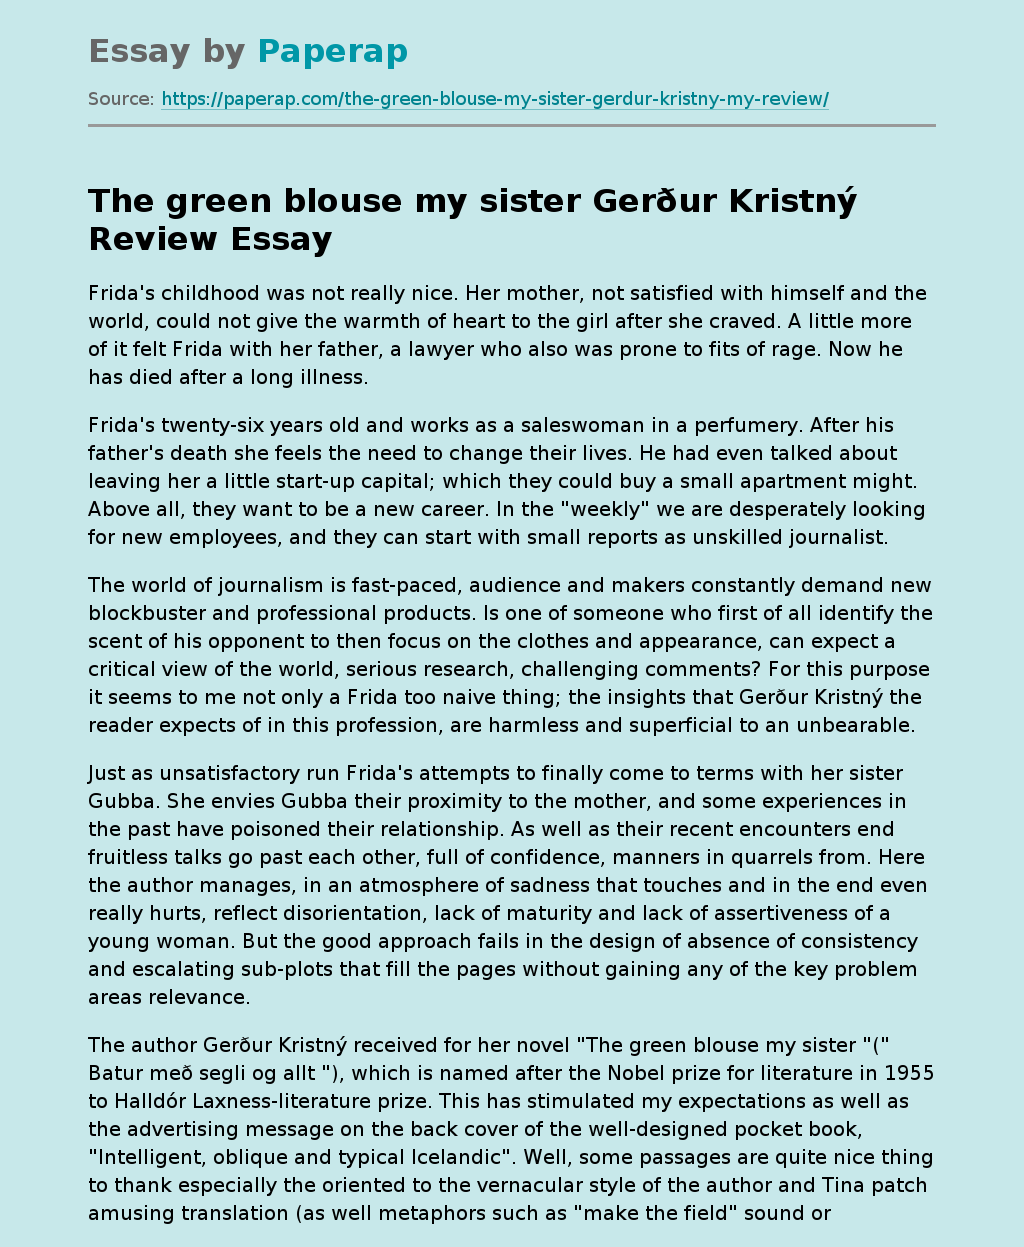 The green blouse my sister Gerdur Kristny Review